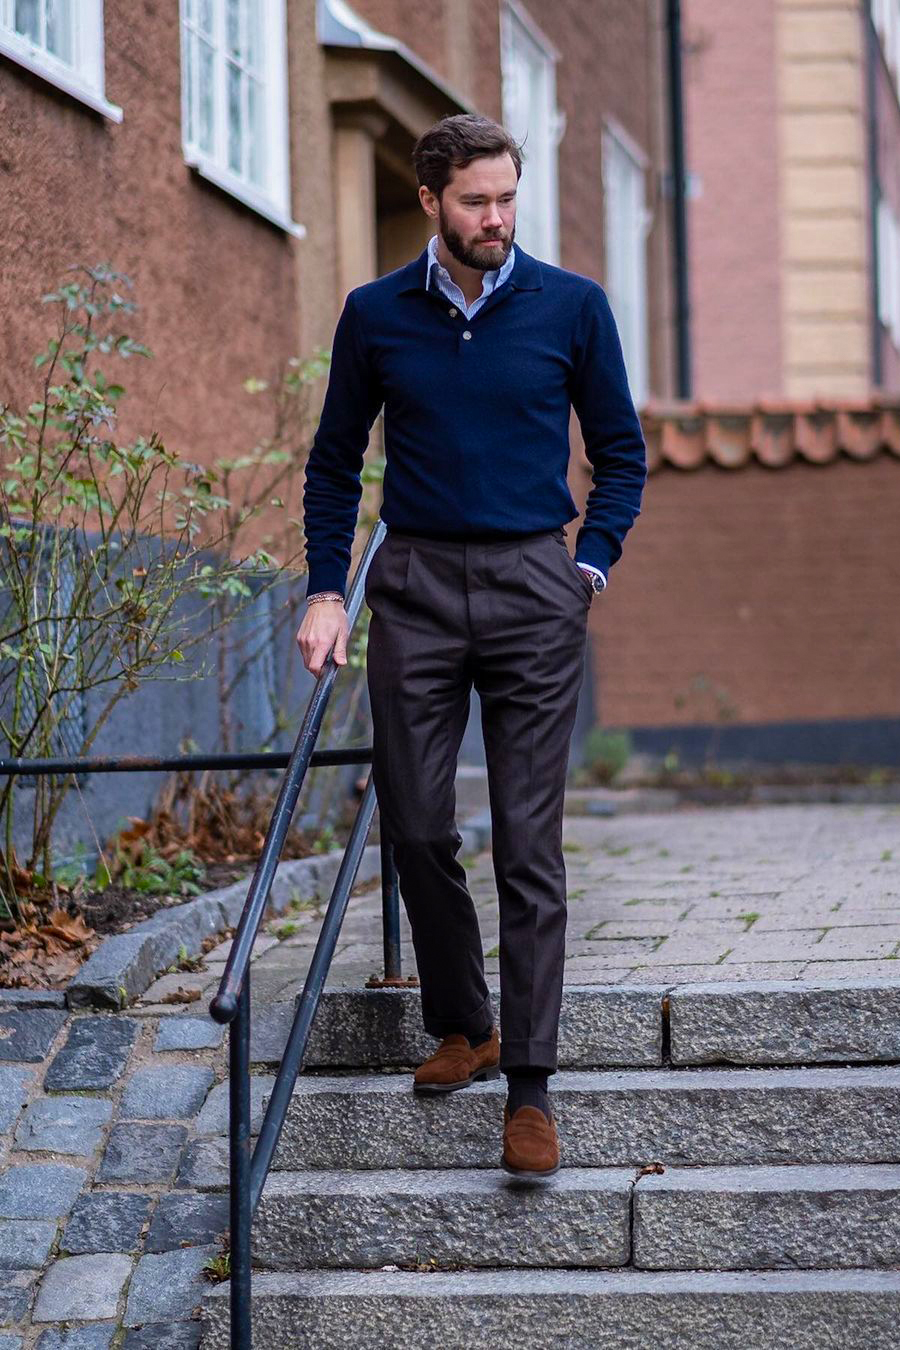 Polo neck sweater, dress shirt, dress pants, and loafers outfit